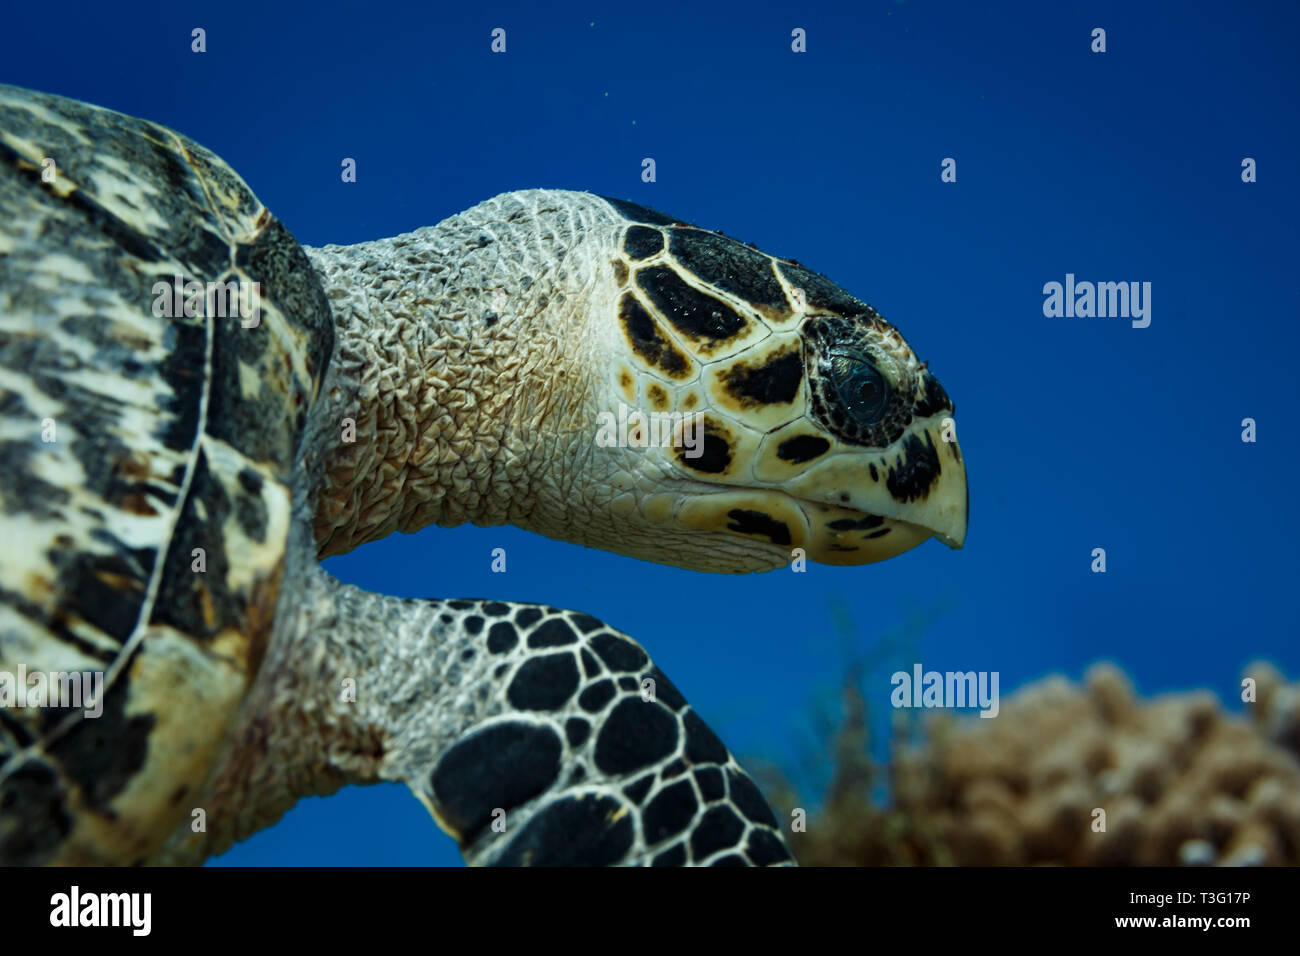 Closeup of side of Hawksbill Turtle, Eretmochelys imbricata, head and mouth with closed beak Stock Photo